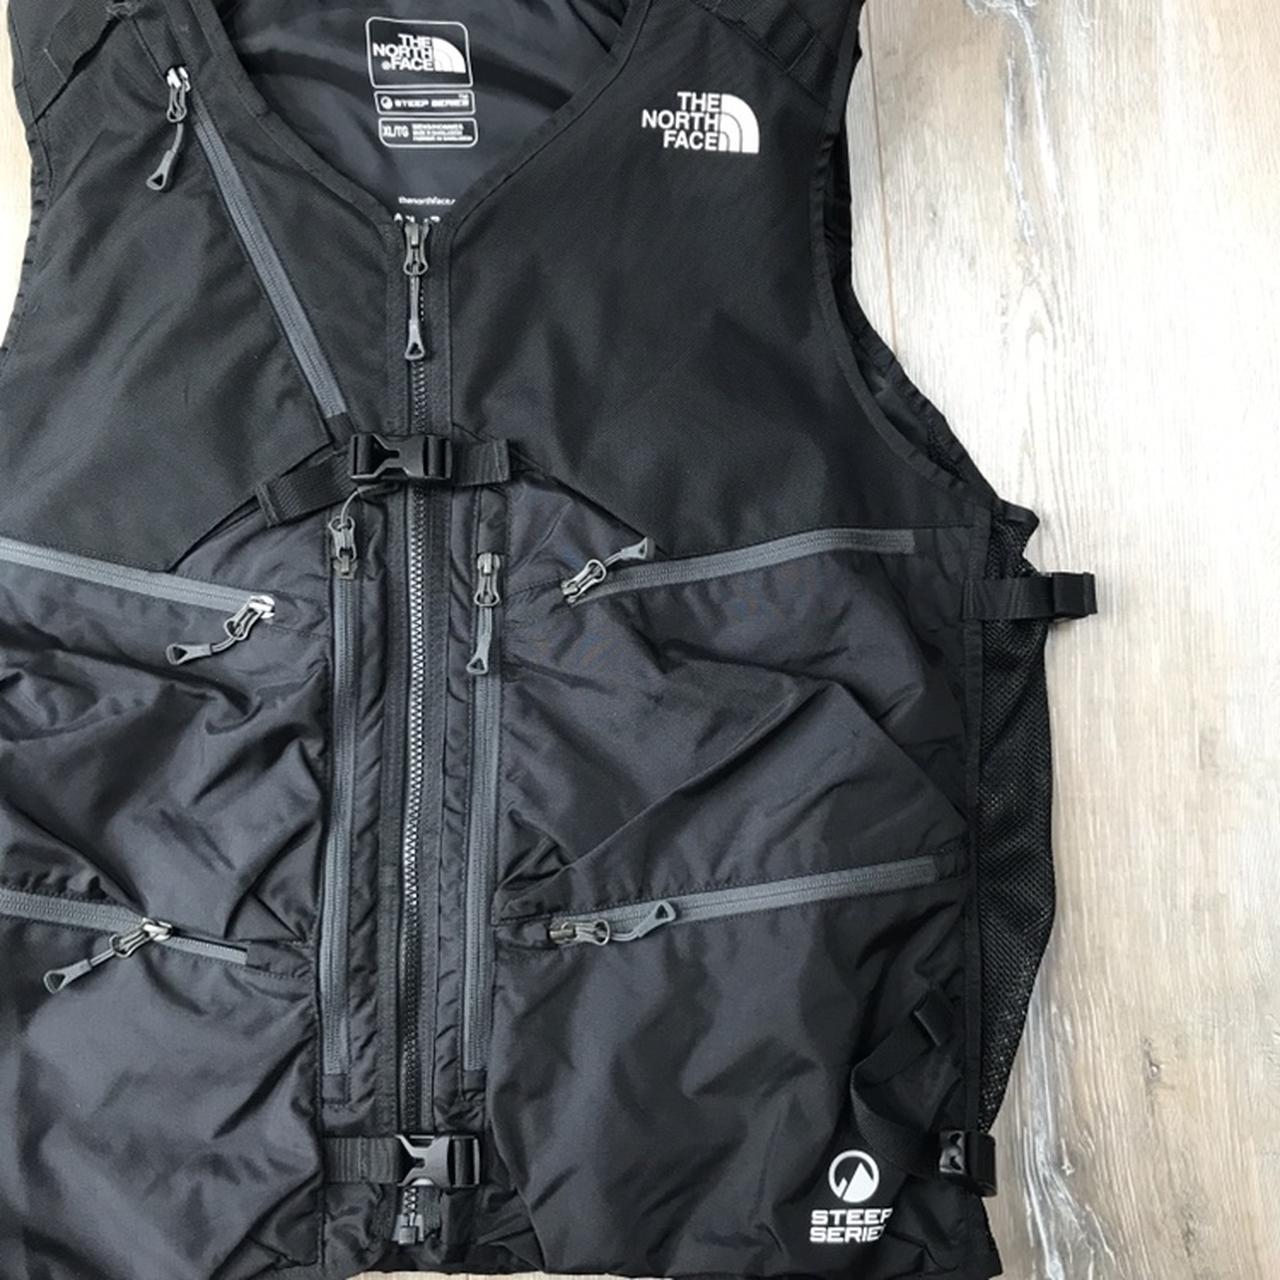 The North Face Steep Series Technical Vest. Not too - Depop